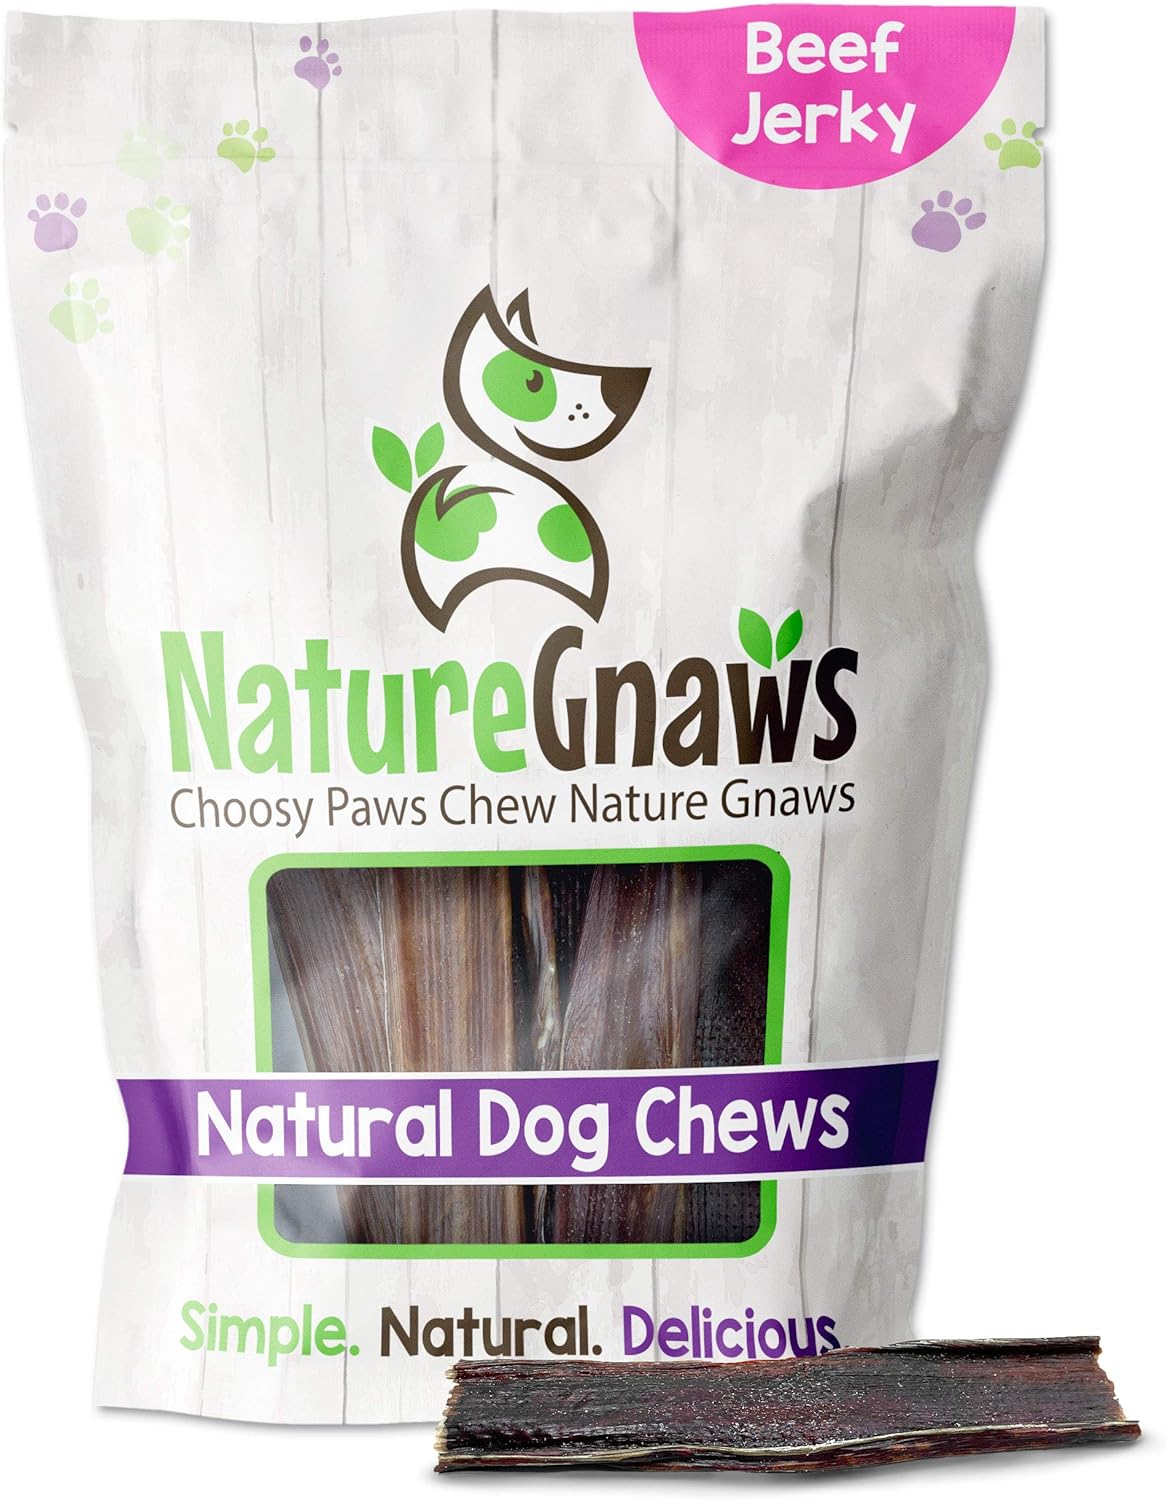 Nature Gnaws - Beef Jerky Chews for Small Dogs - Premium Natural Beef Gullet Sticks - Simple Single Ingredient Tasty Dog Chew Treats - Rawhide Free - 4-5 Inch